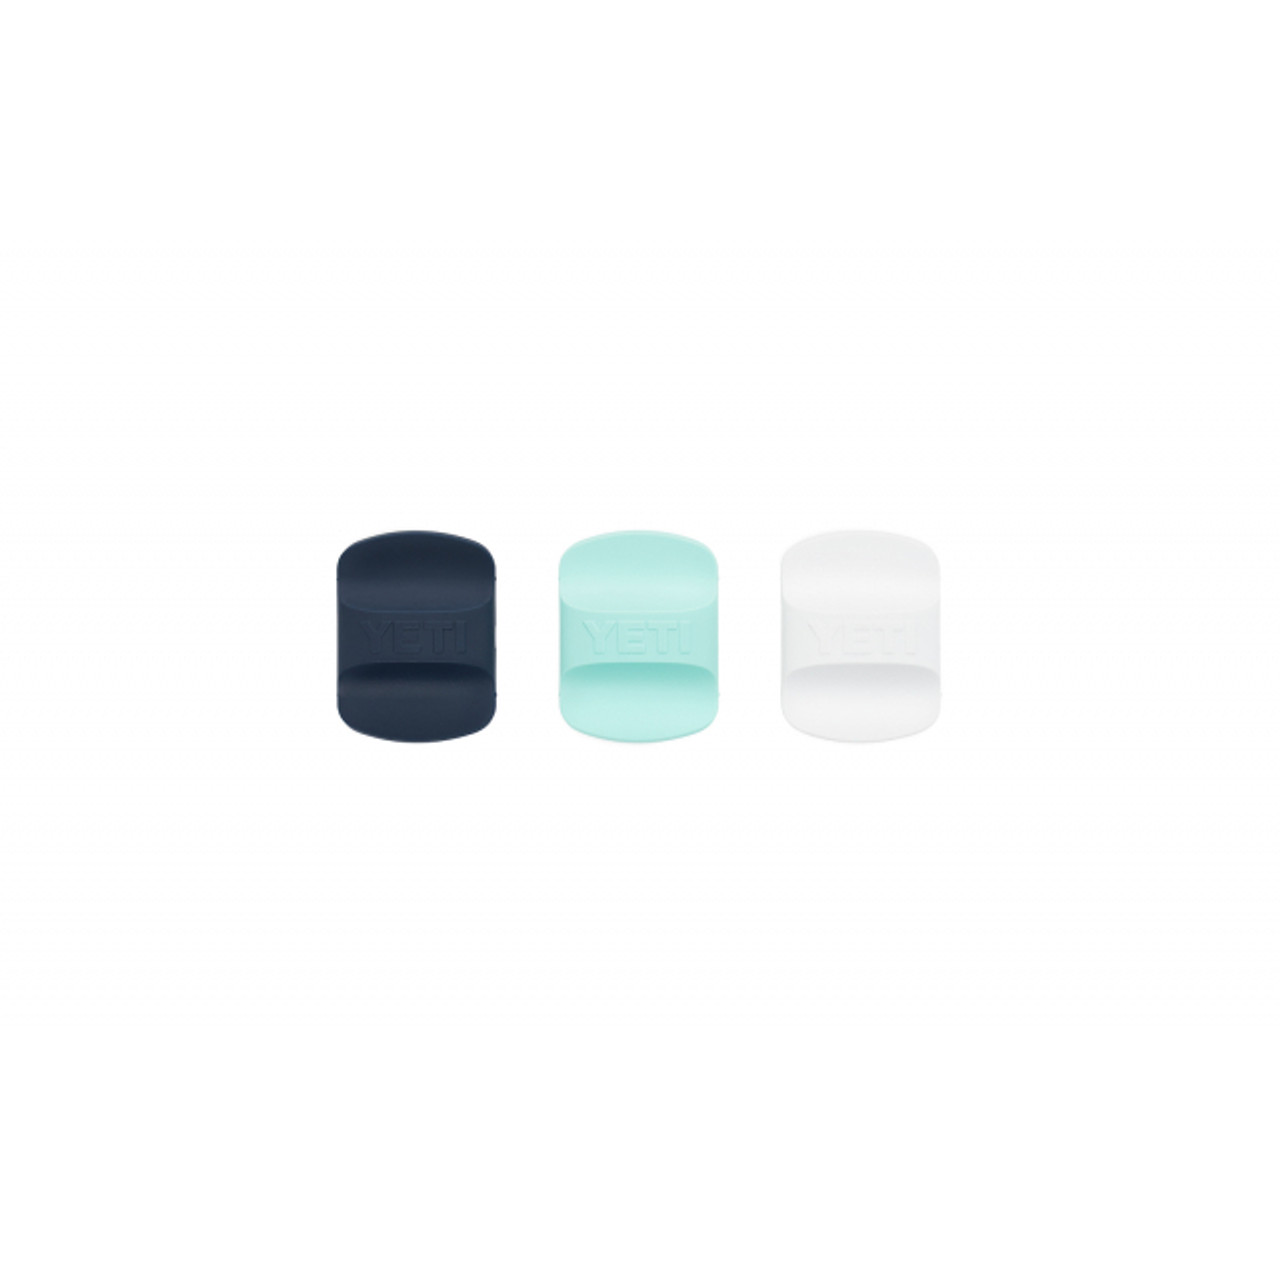 Yeti Rambler Magslider Color Pack - Navy, Seafoam and White